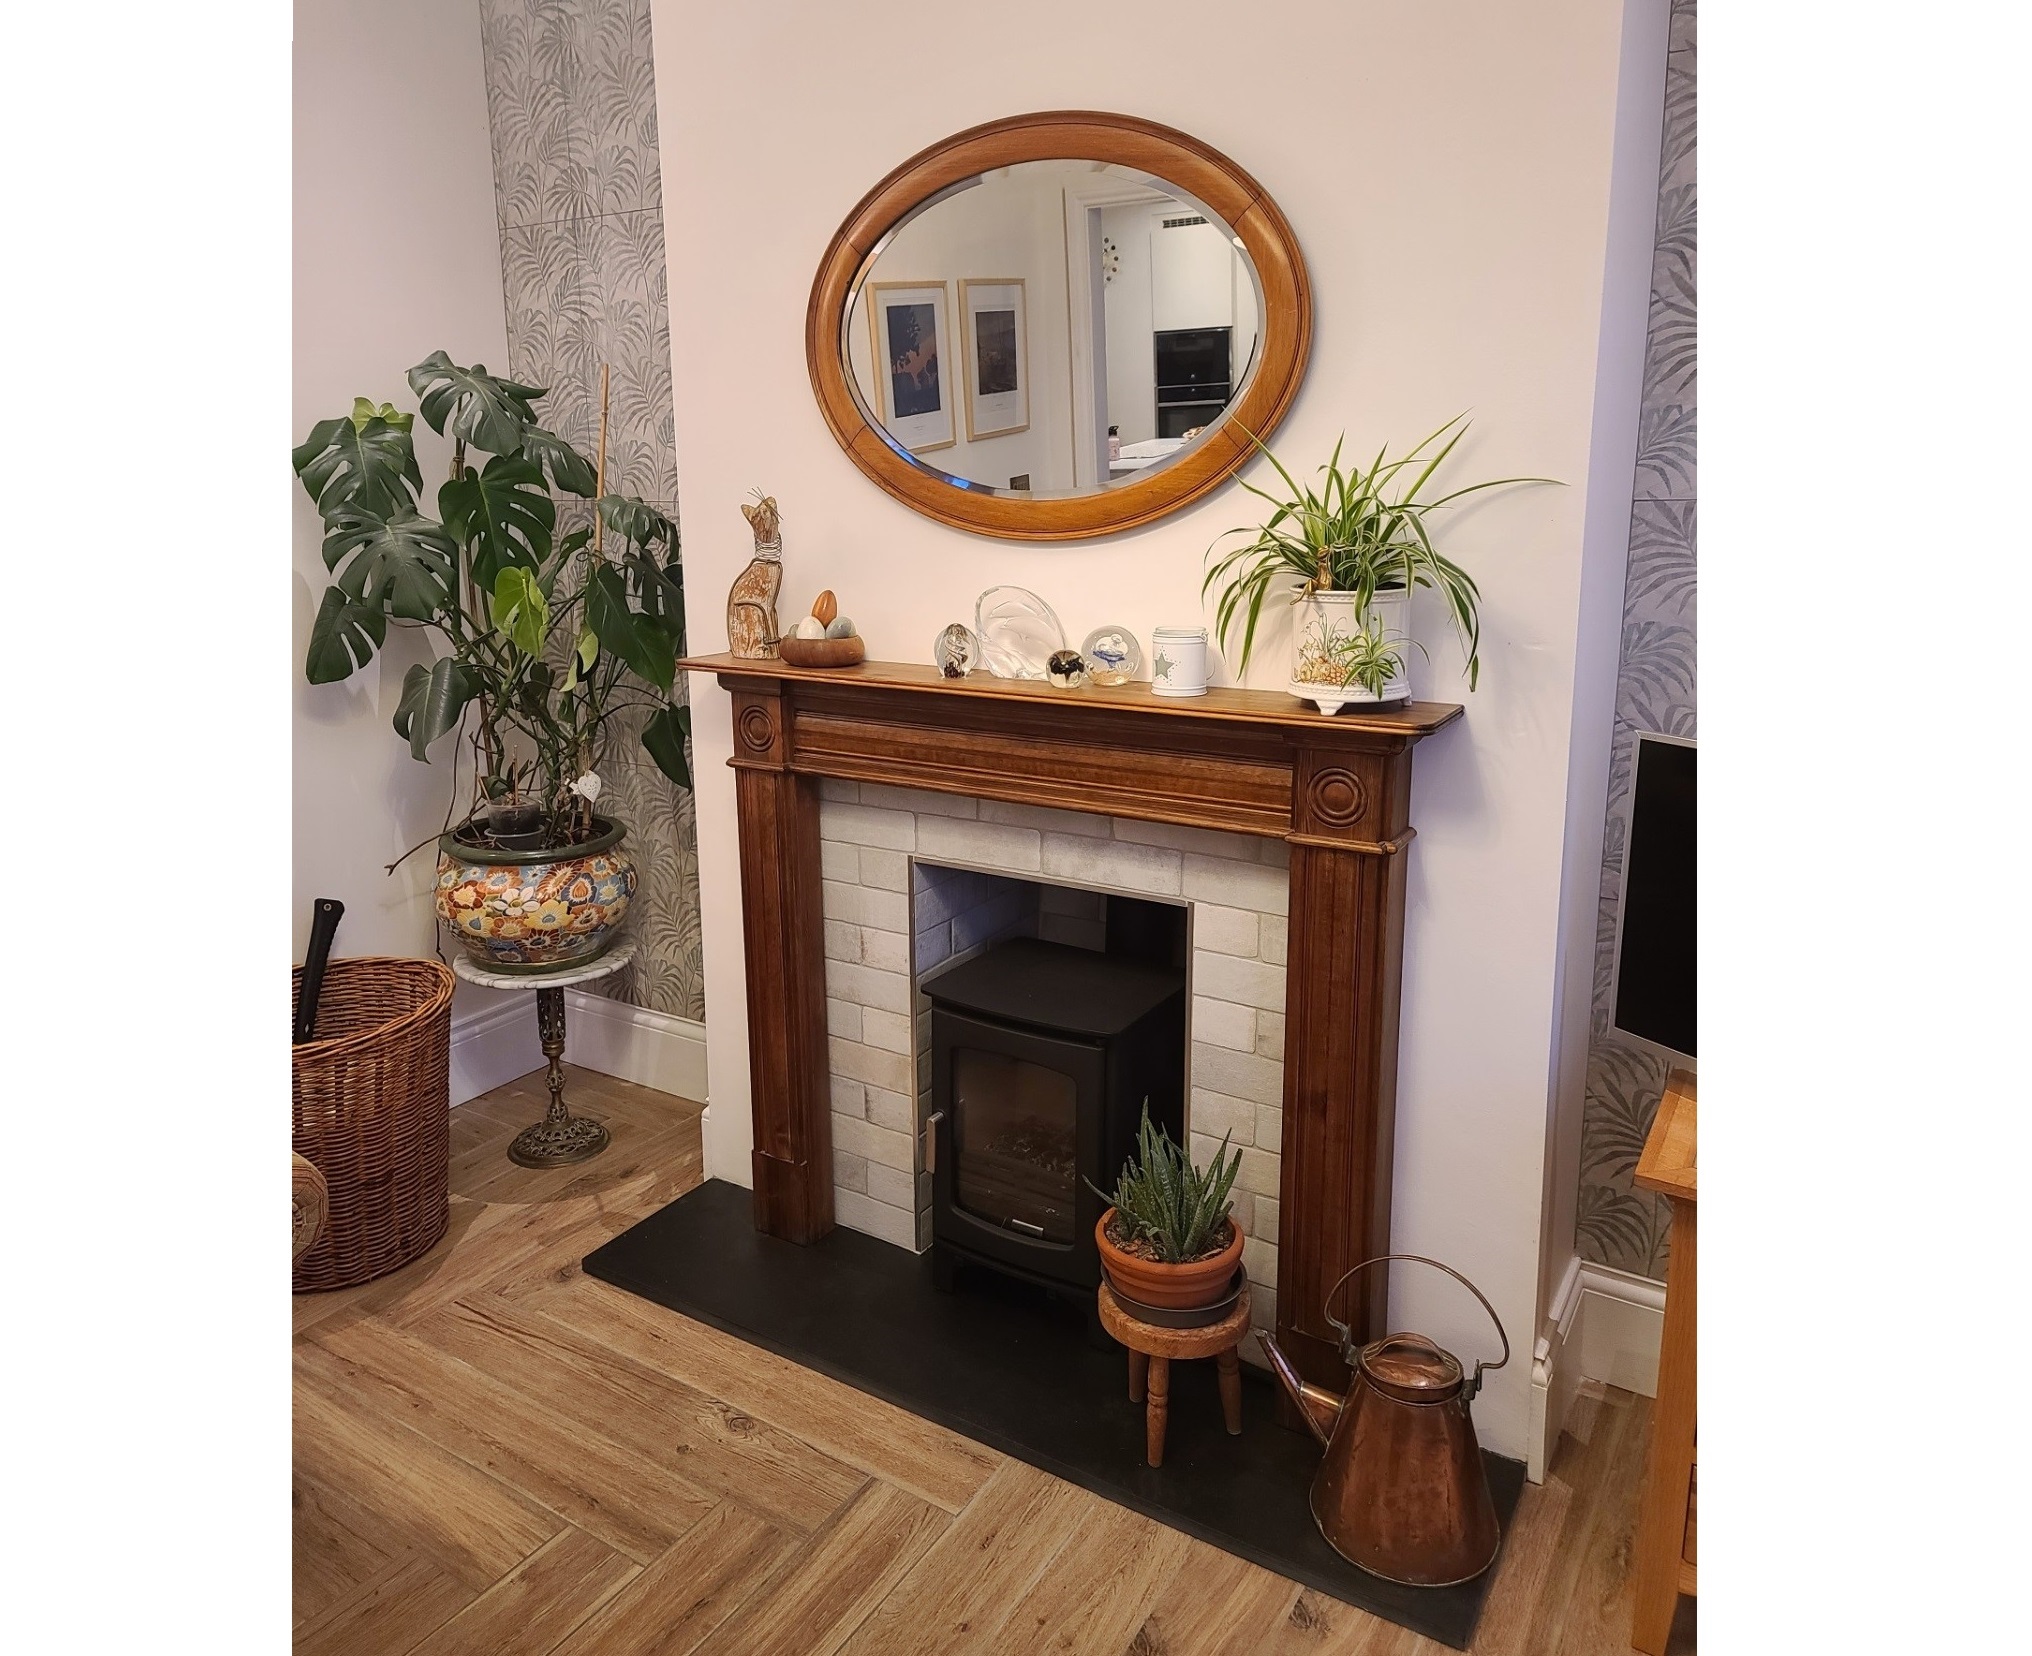 UKAA supply the ECO Enamel log burning stove by Carron. This stove is ECO design 2022 compliant and comes with a 5-year guarantee